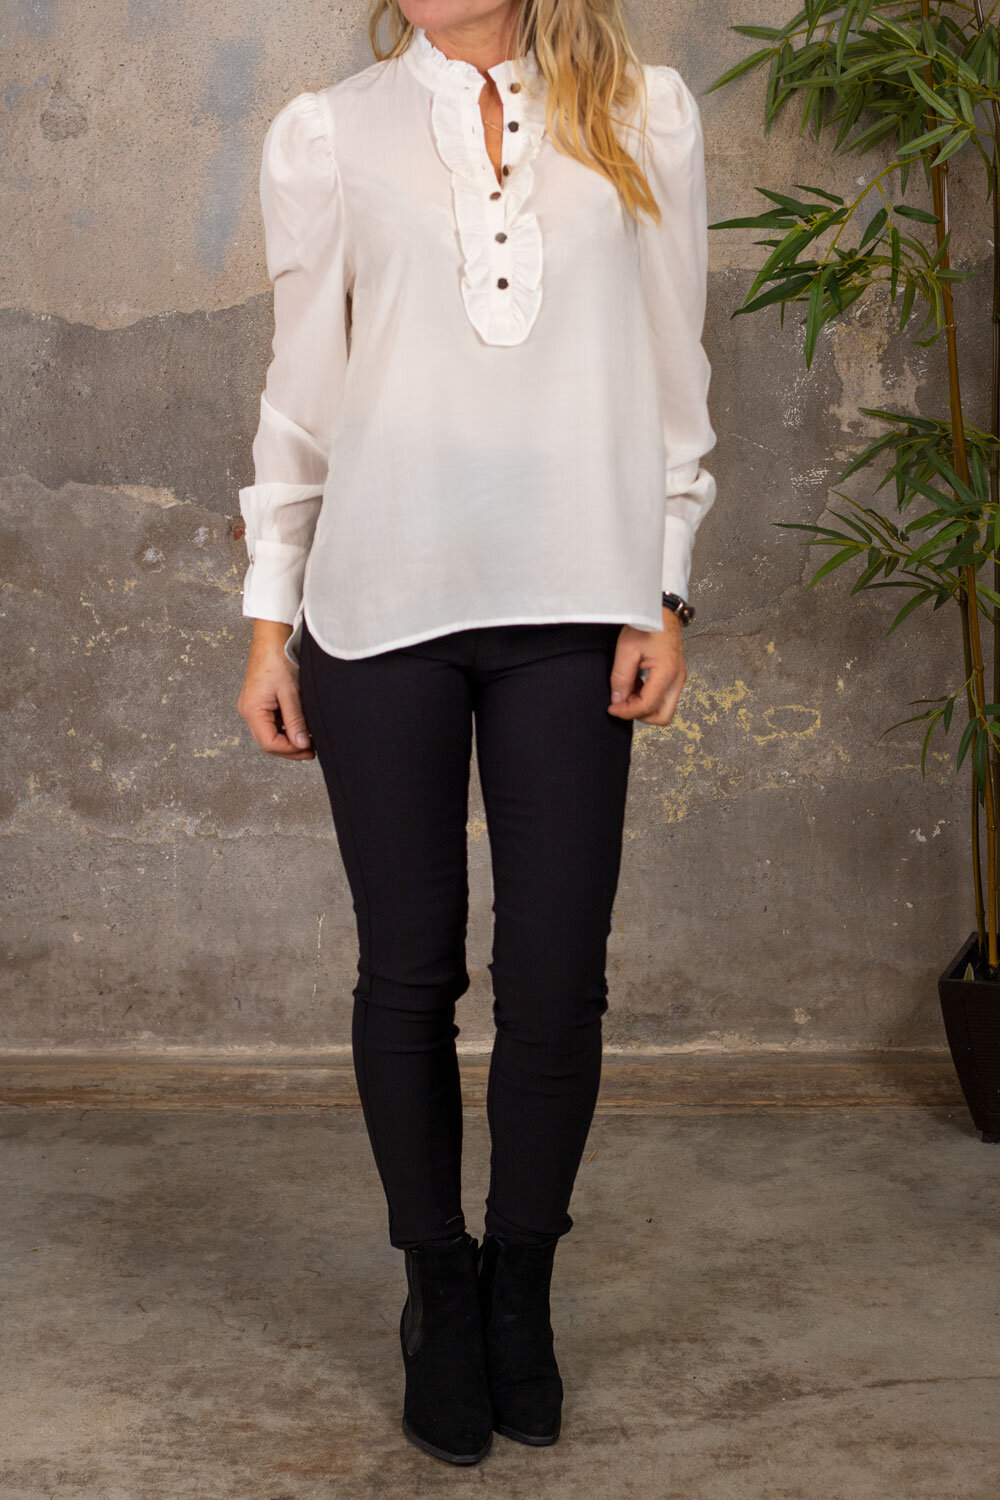 Augusta Blouse - Ruffle Details - Off white